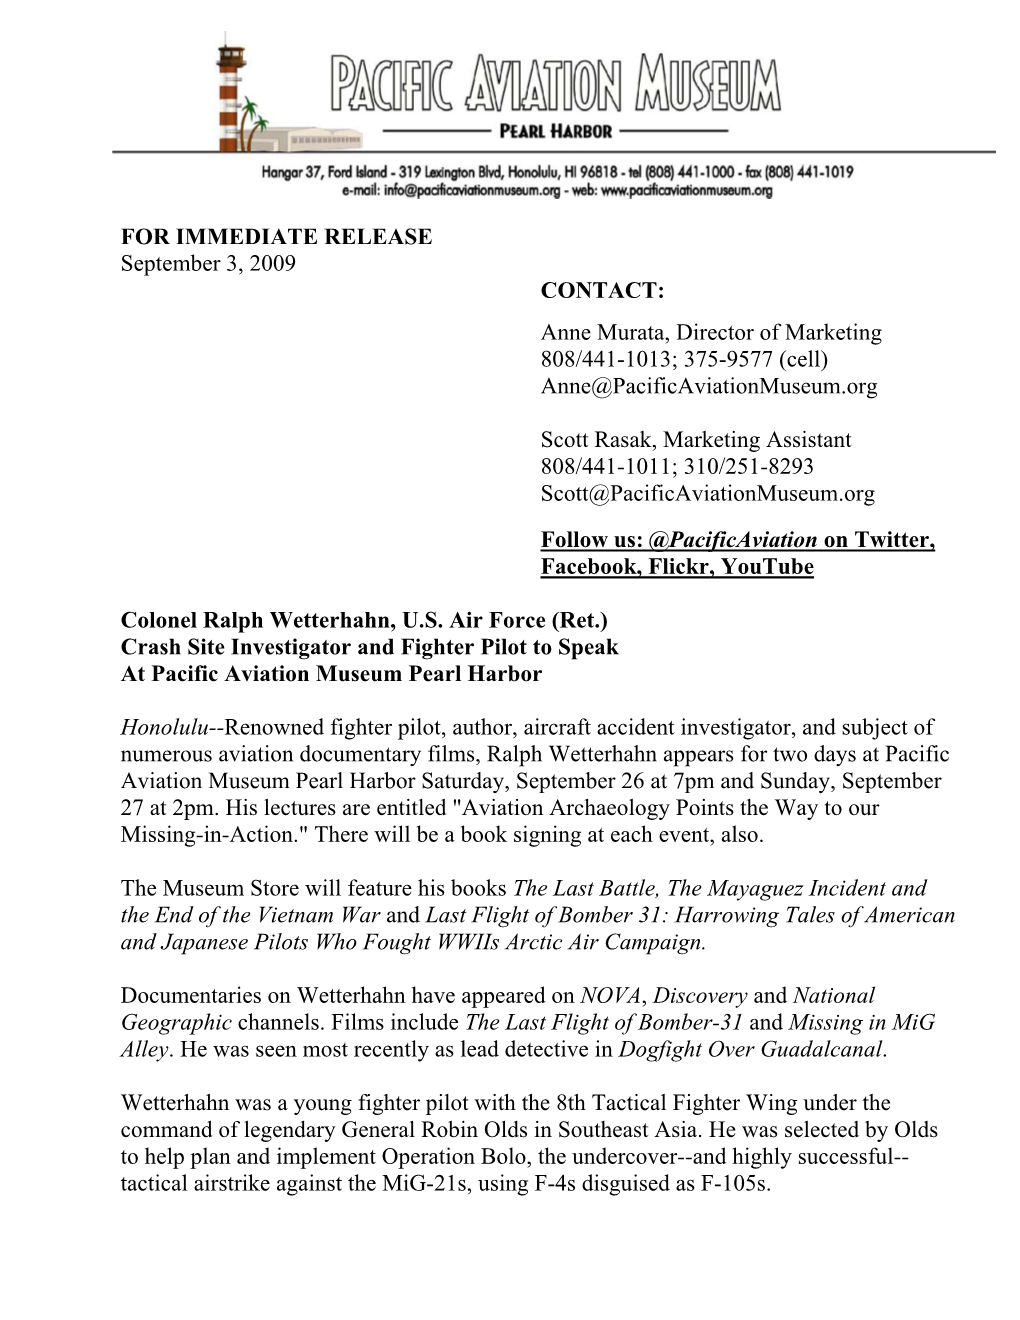 FOR IMMEDIATE RELEASE September 3, 2009 CONTACT